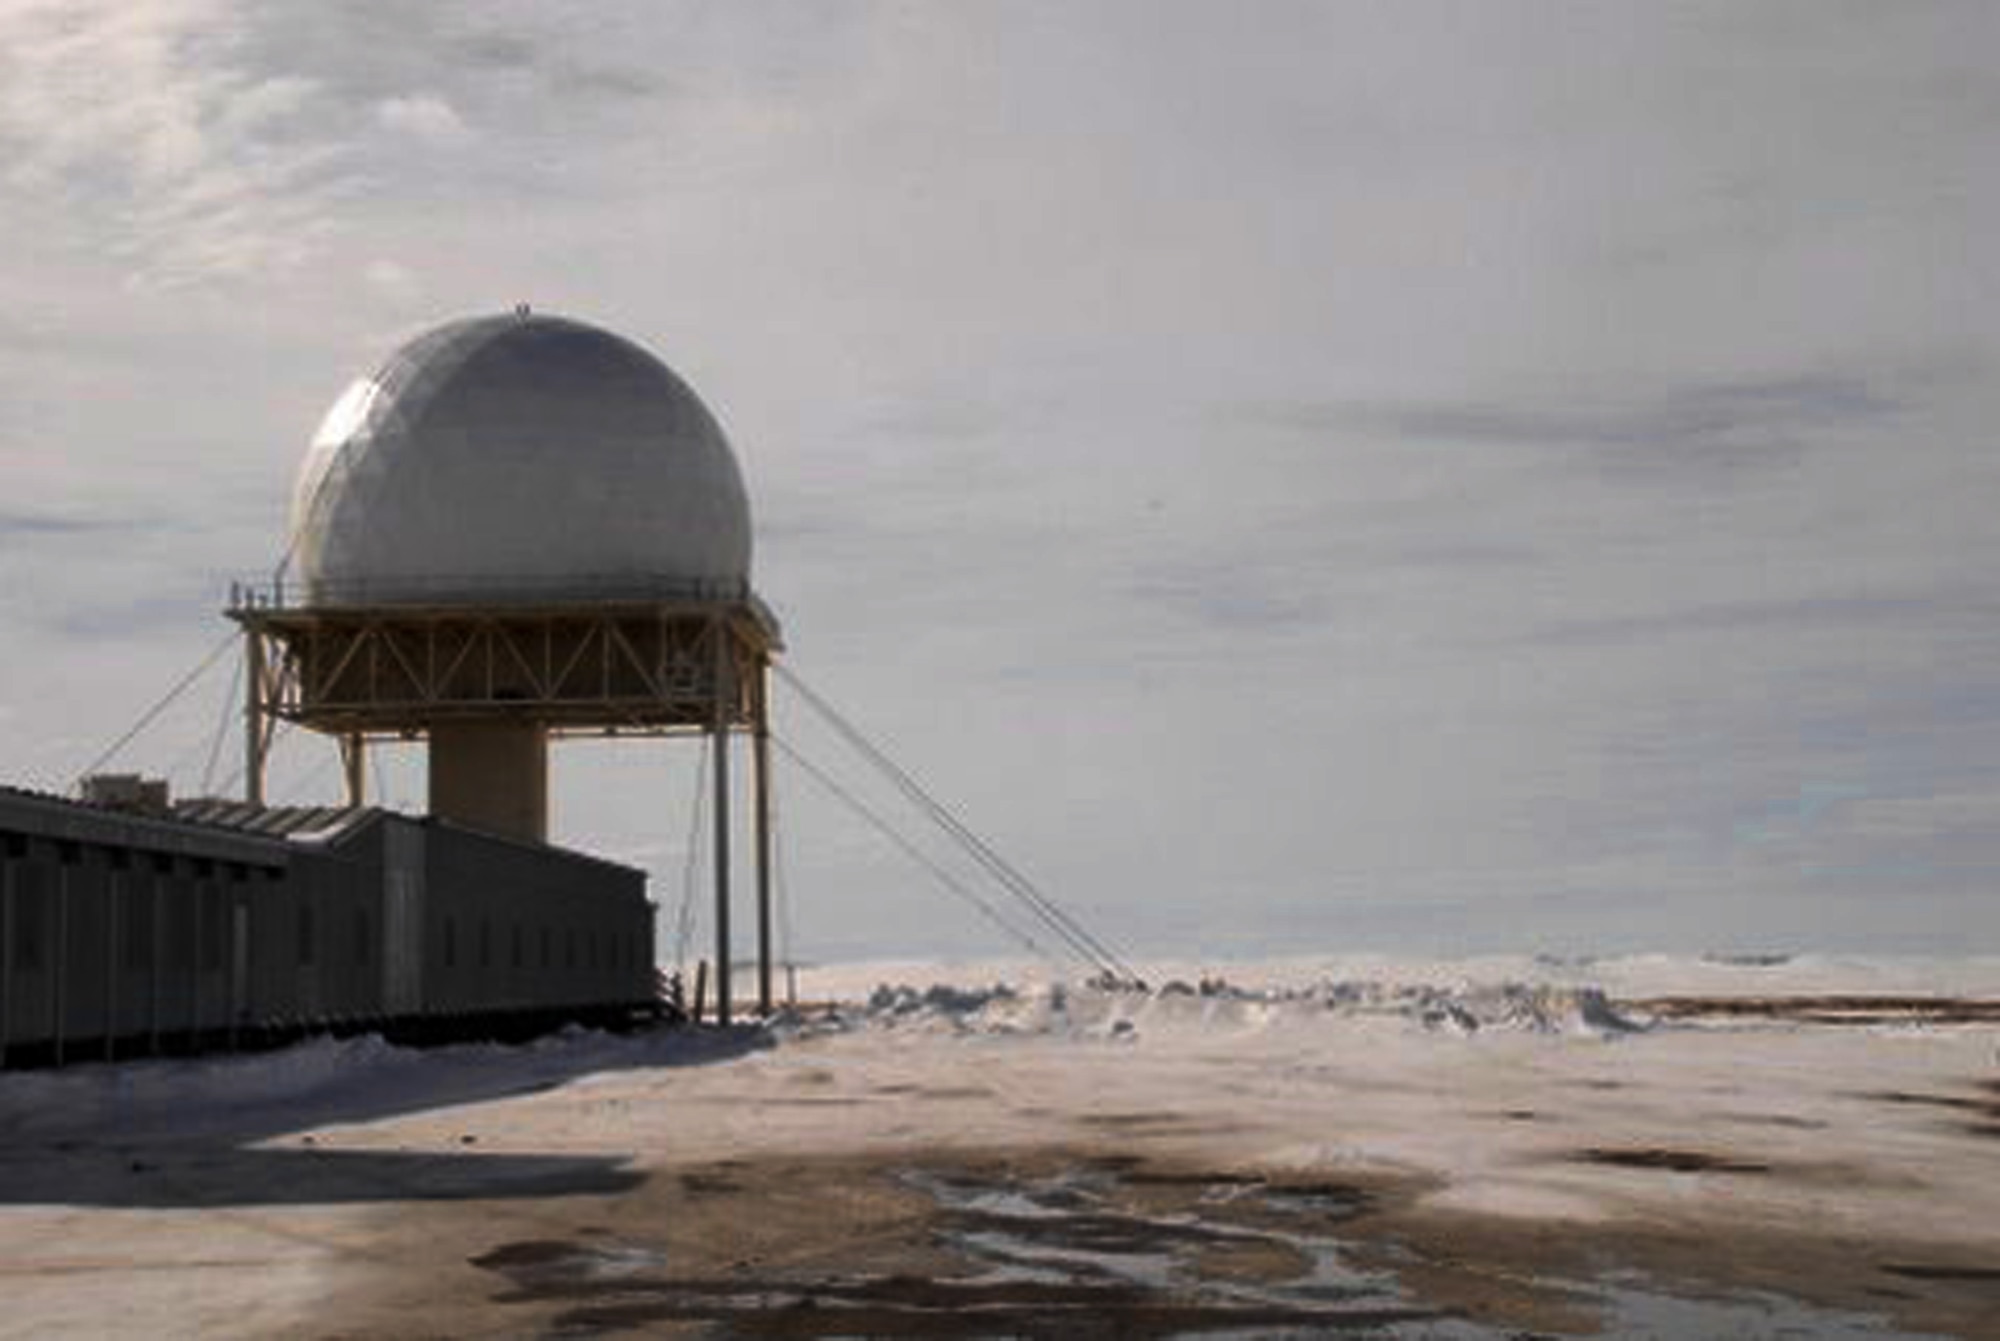 The Barter Island Radar Site is located adjacent to the village of Kaktovik, Alaska, on the shores of the Beaufort Sea. The facility is part of the North Warning System, the sucessor to the old Distant Early Warning line. (U.S. Air Force photo/1st Lt. John Callahan)